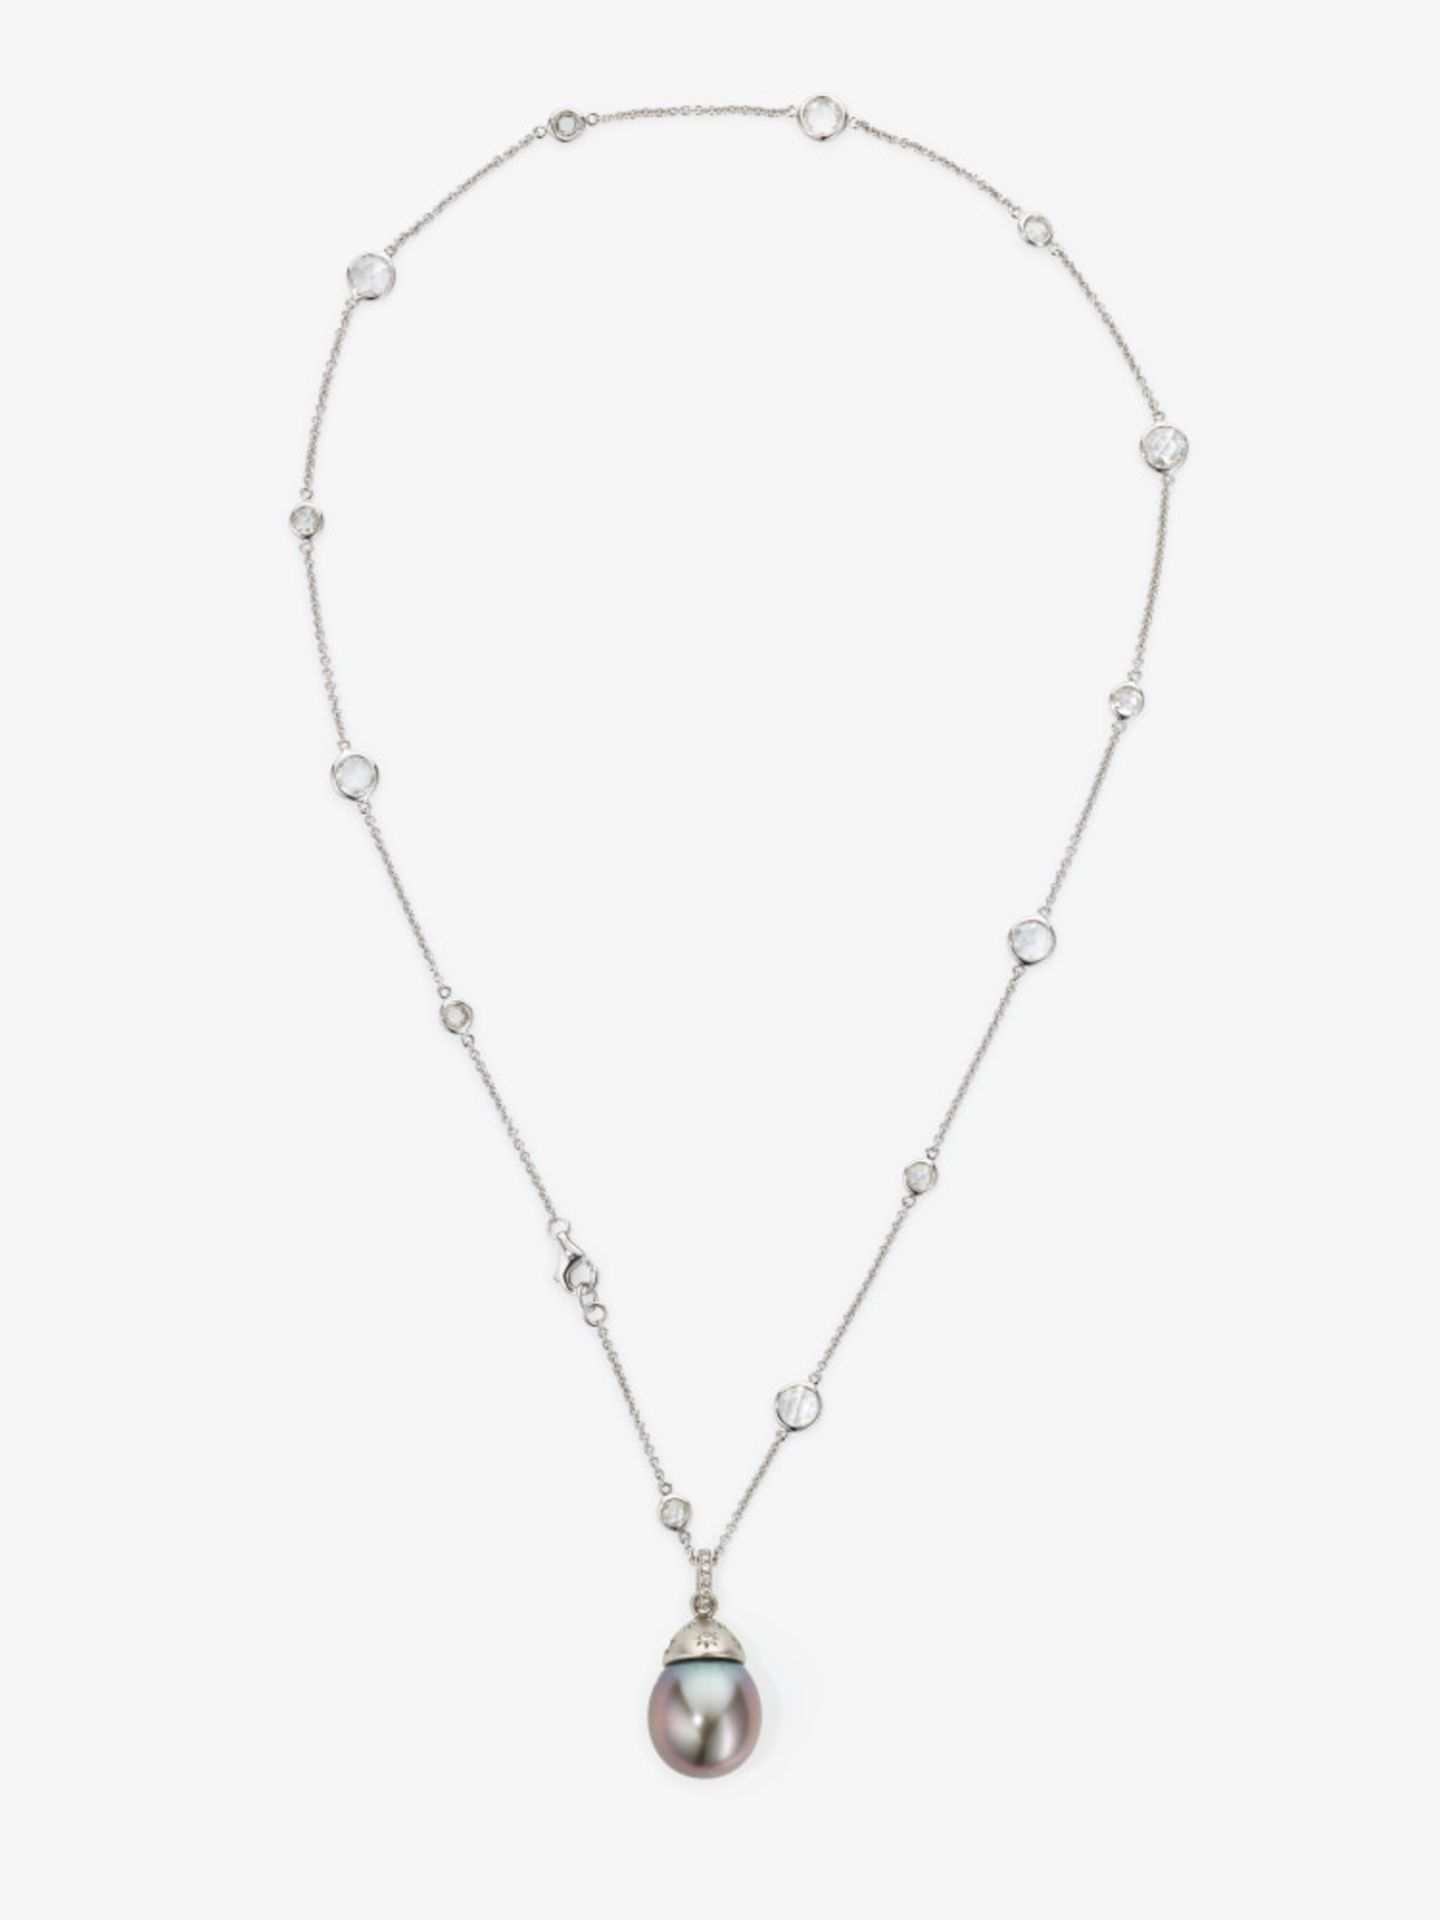 A delicate link chain necklace decorated with diamond roses and a South Sea Tahitian cultured pearl  - Image 3 of 4